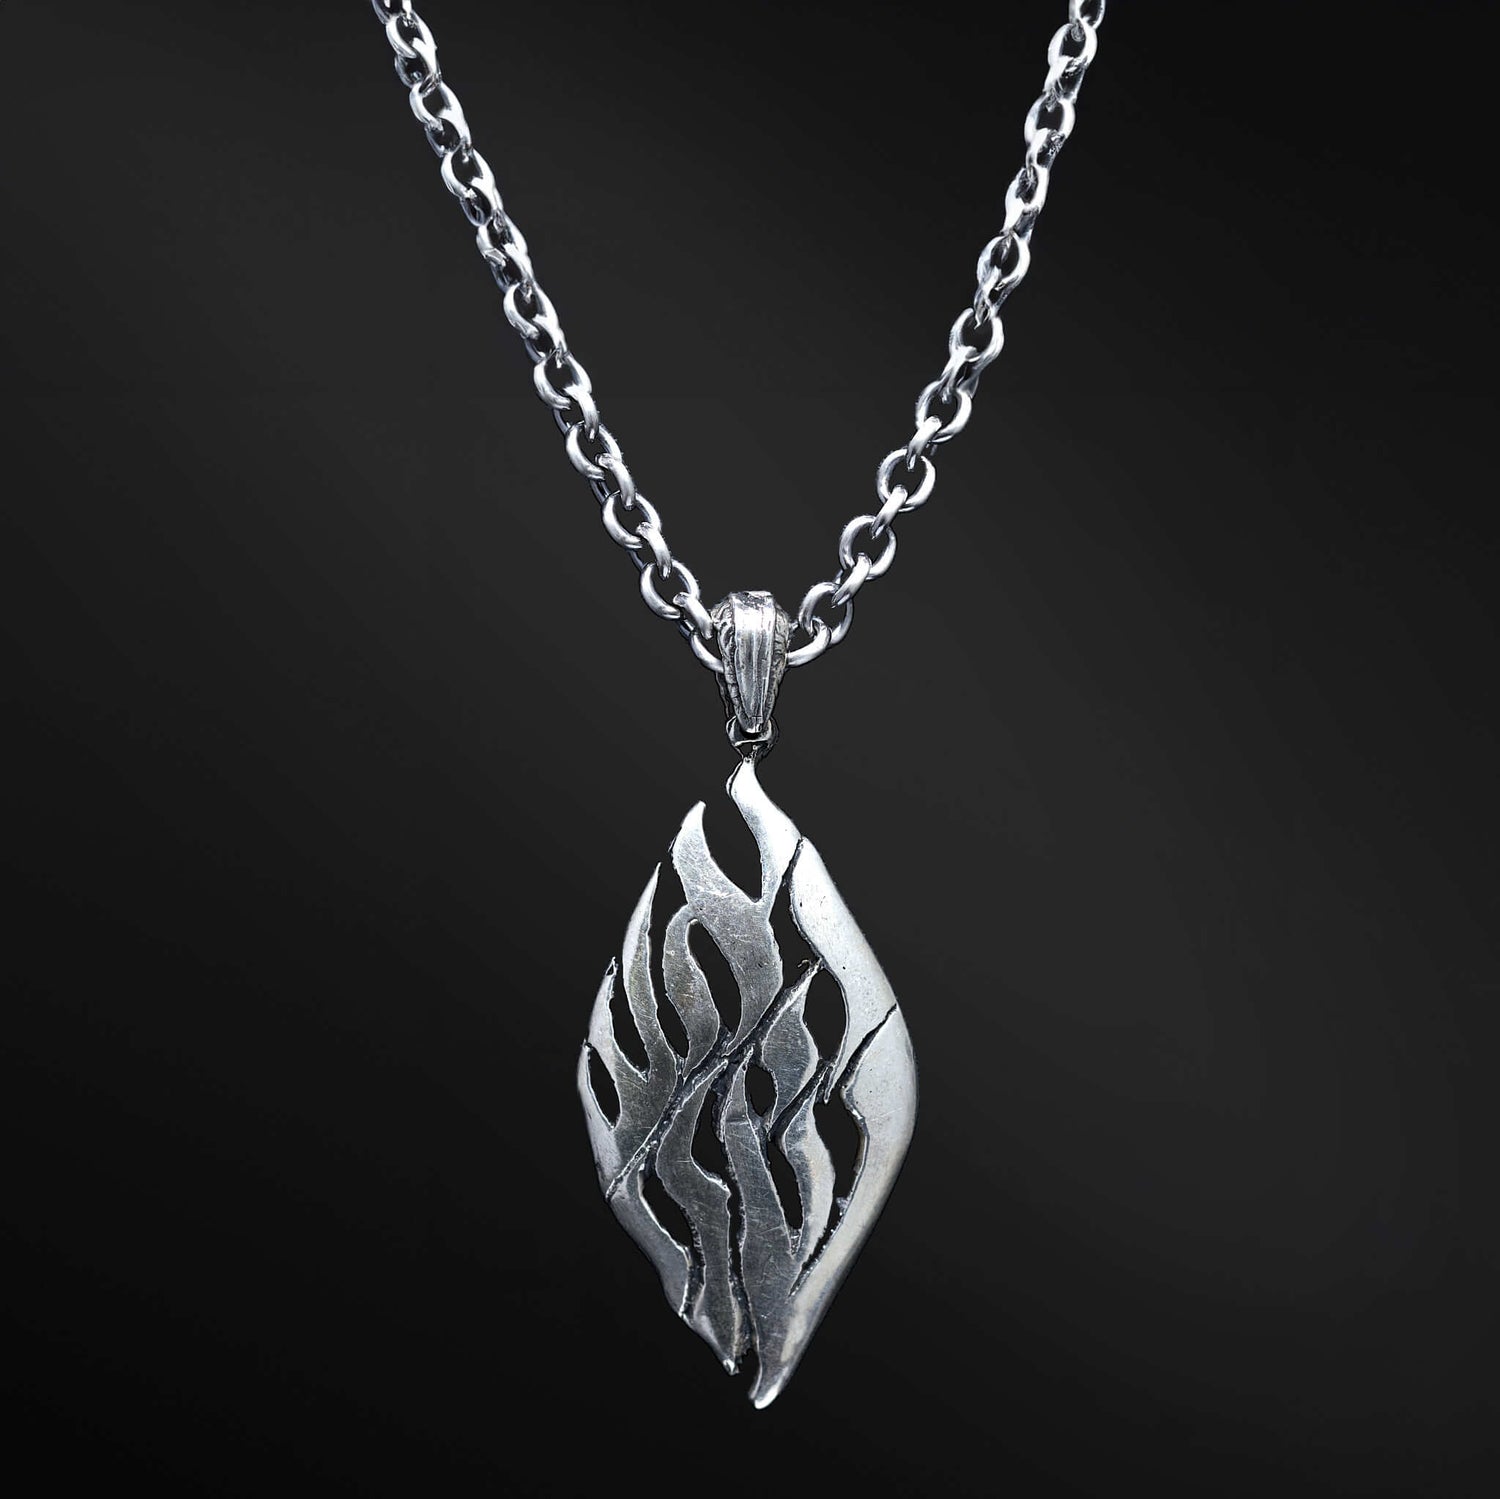 &quot;Naftali Large Pendant: Embrace strength and grace with this striking accessory. The intricate design and exquisite craftsmanship capture the essence of agility and power. Elevate your style with this symbol of confidence and sophistication, making a bold statement wherever you go.&quot;